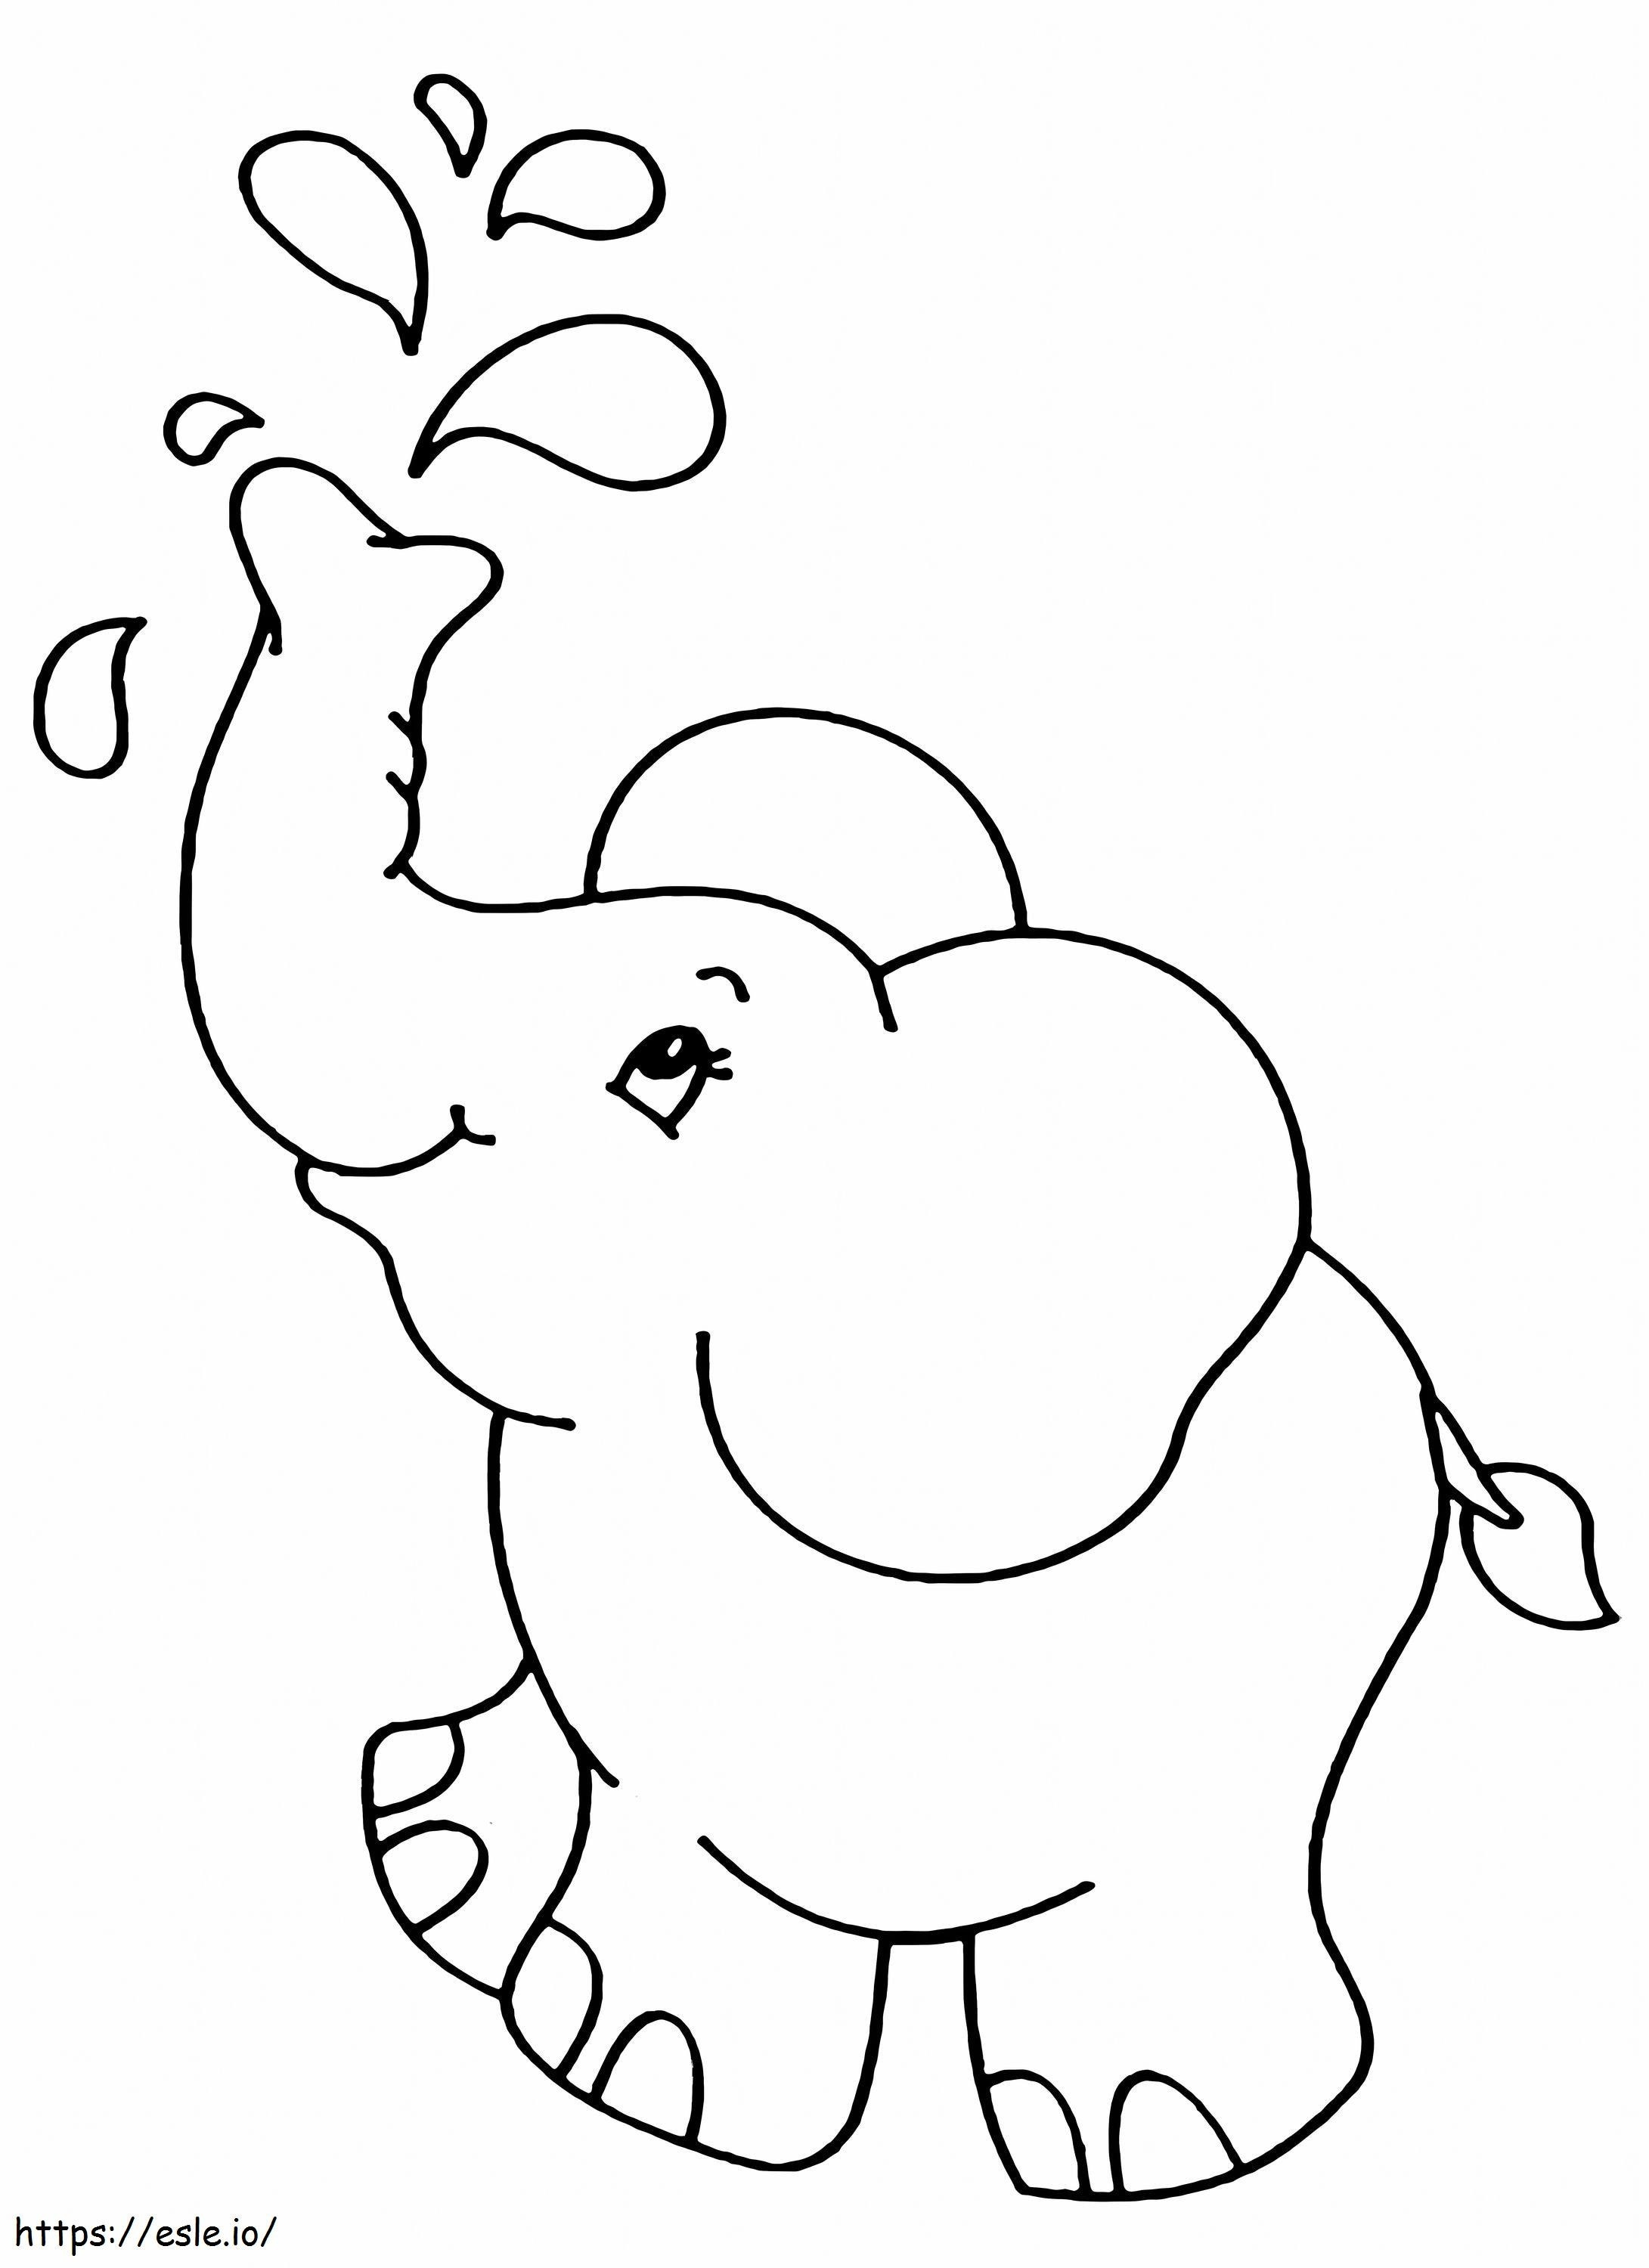 Simple Elephant coloring page